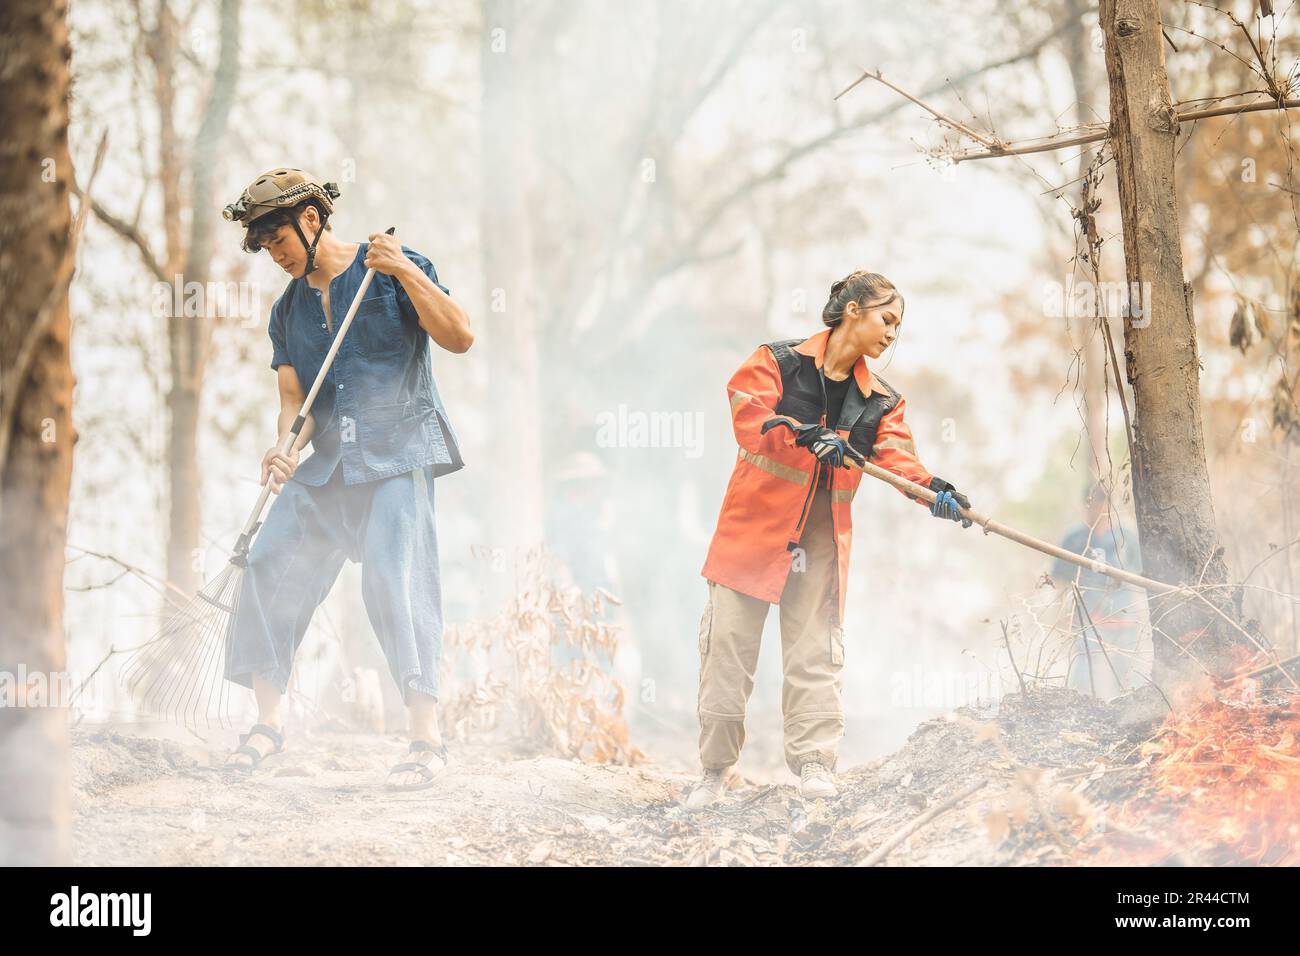 Volunteers fire fighting team people are extinguishing forest fires in dry forest tree hot summer weather. Stock Photo